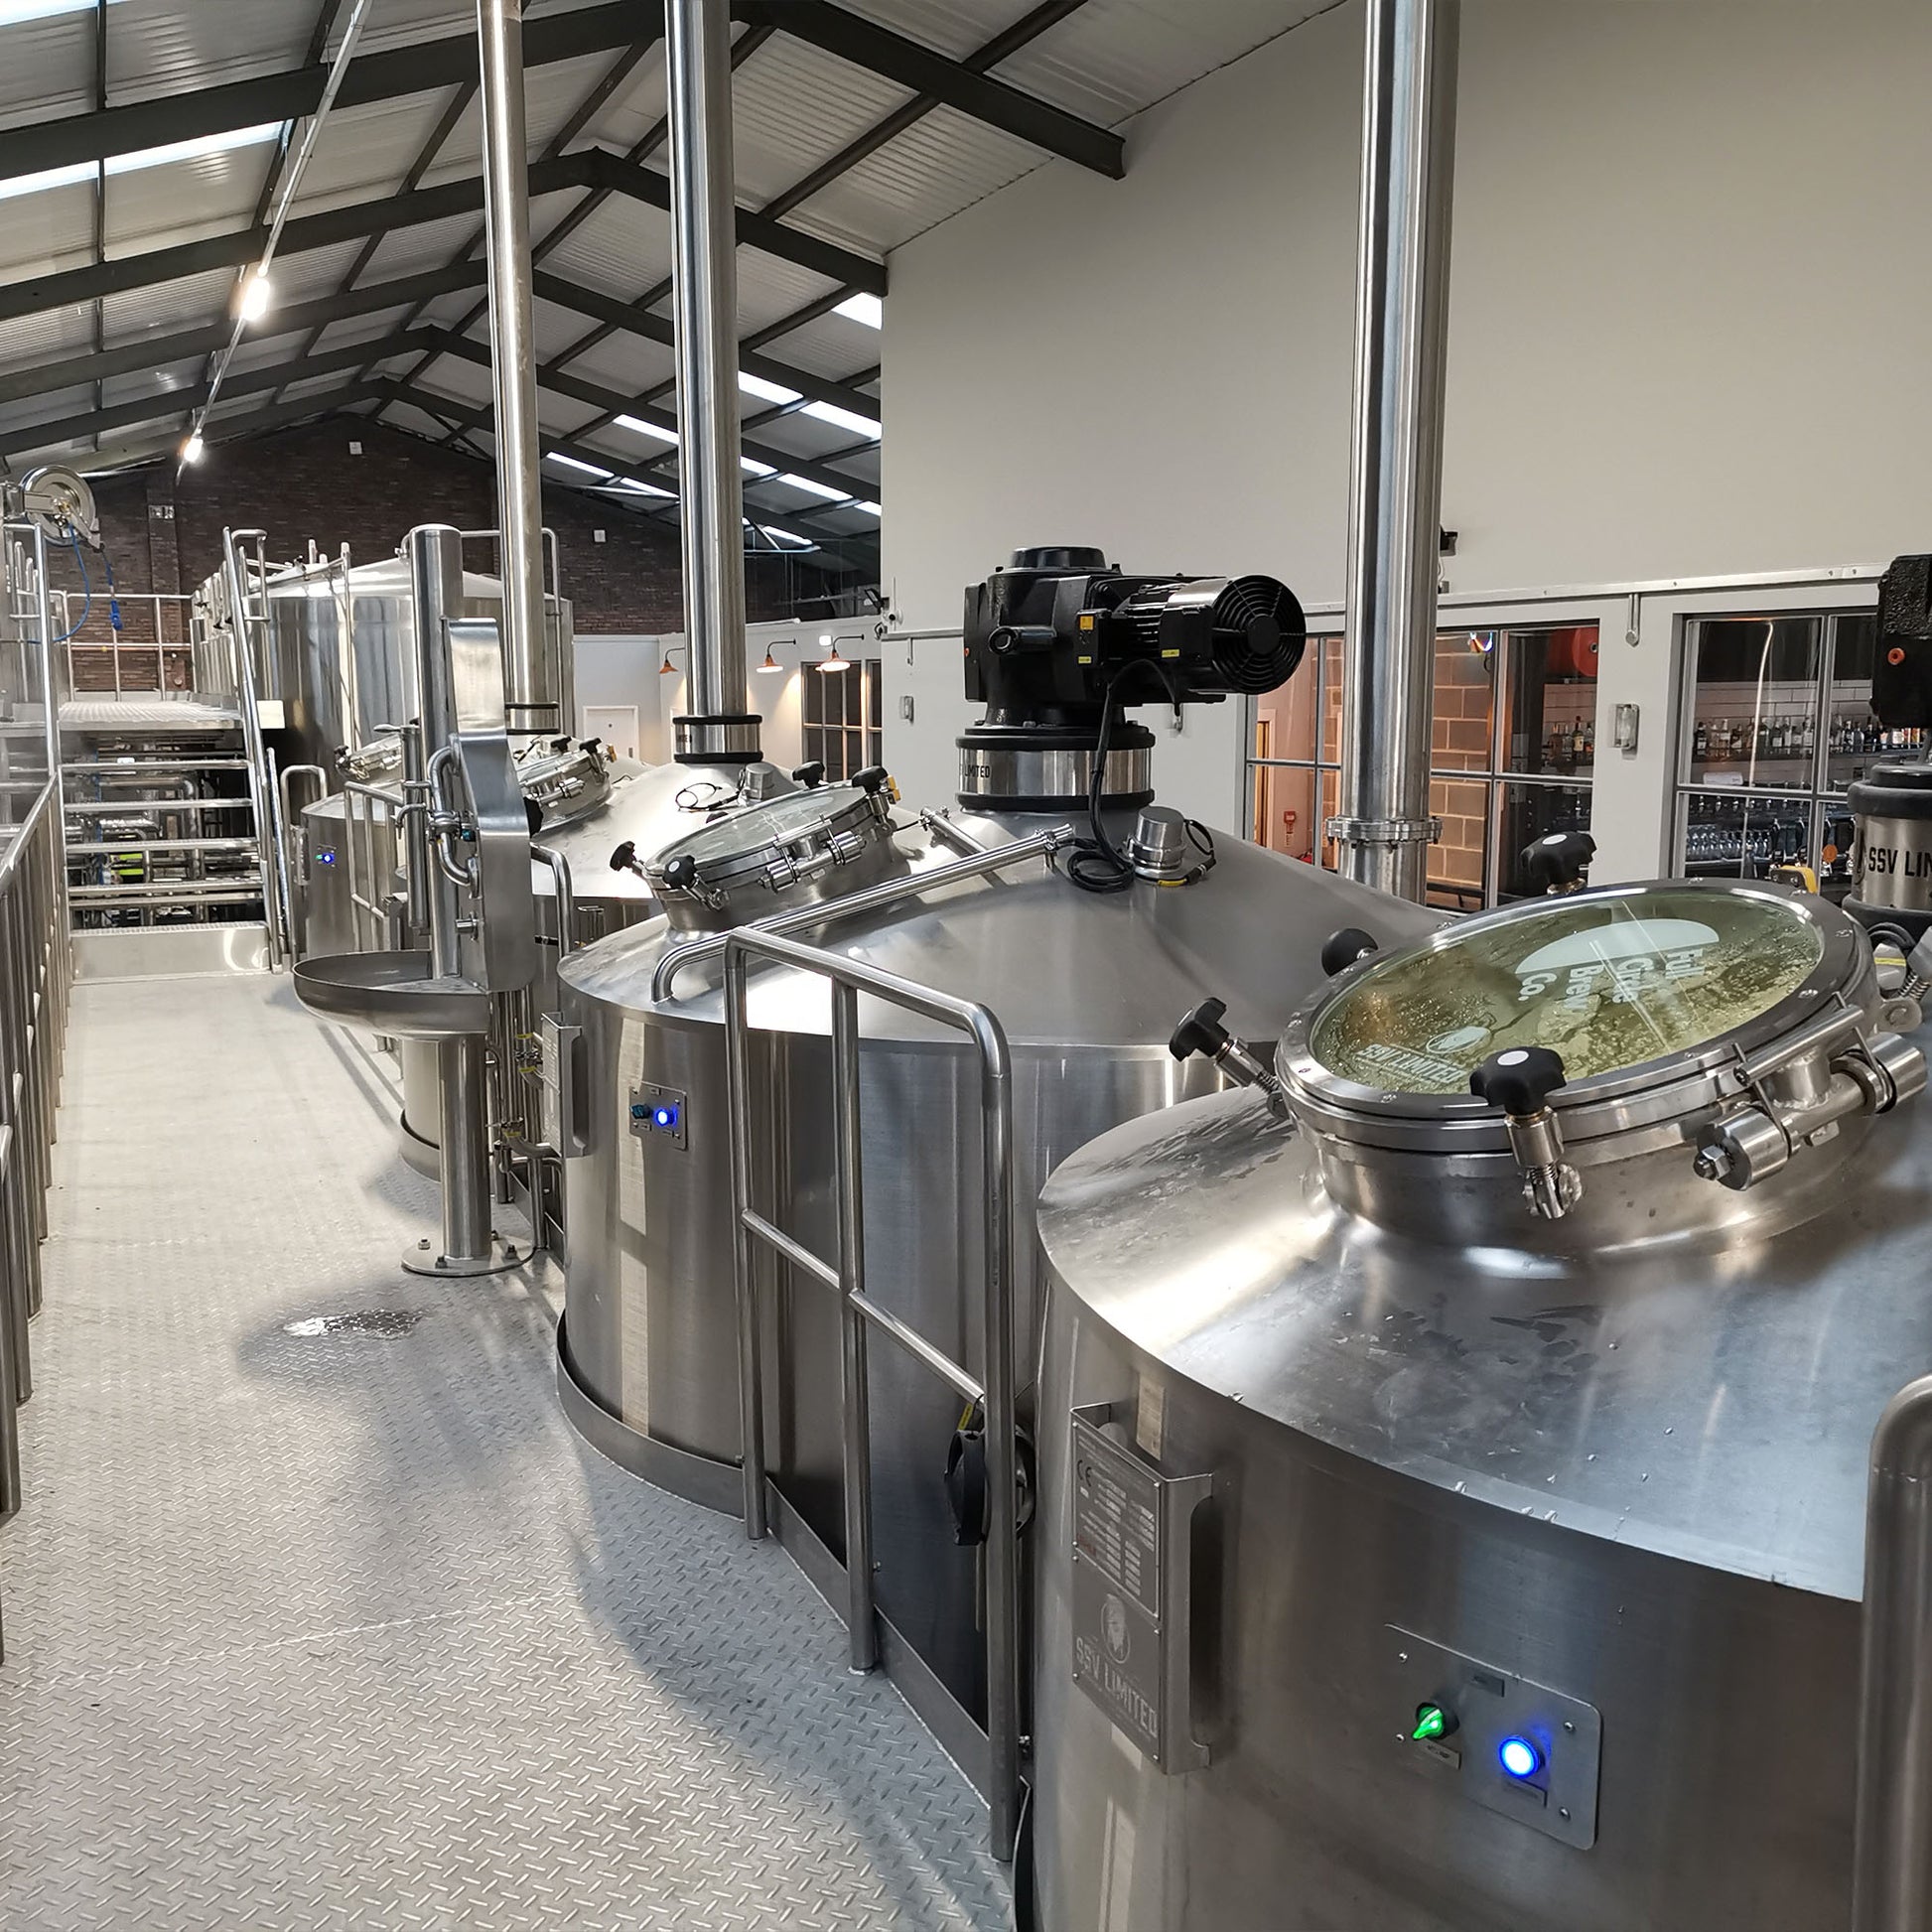 Here is a view from the top of our machinery at the Newcastle based brewery, Full Circle Brew Co. This is the kind of machinery you will witness and be able to gather a better understanding of once you have completed our brewery tour.